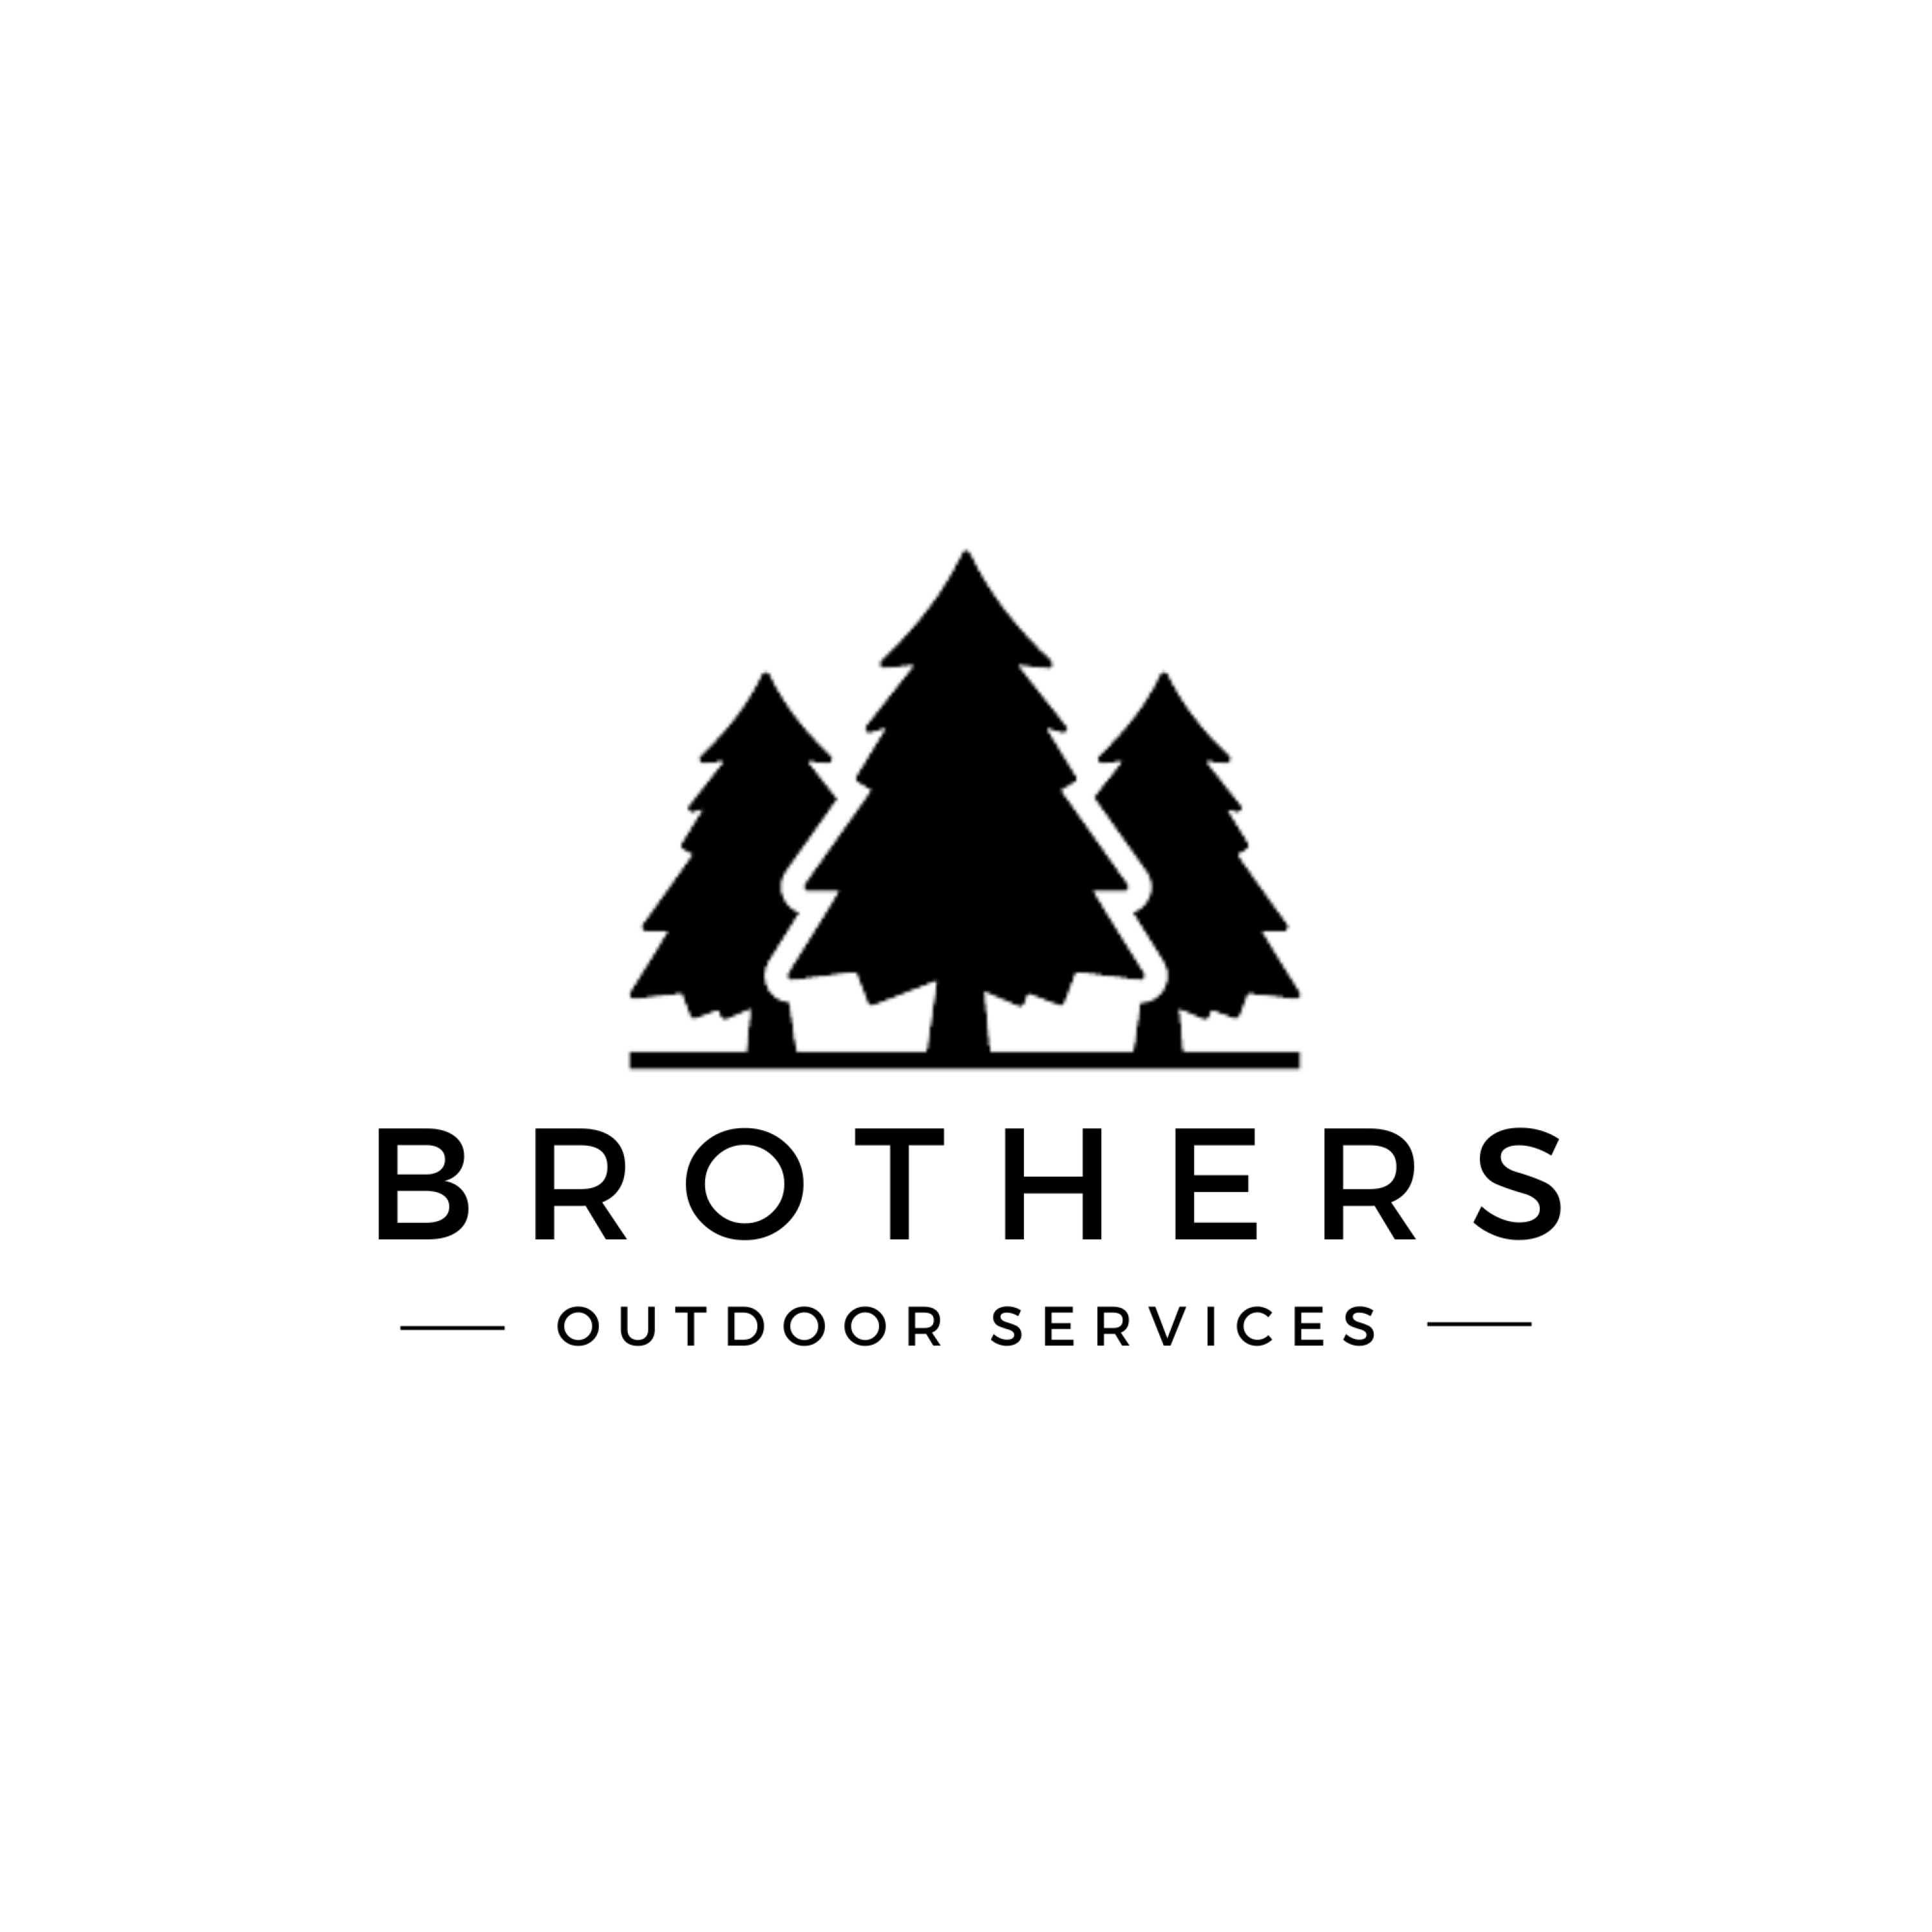 Brothers Outdoor Services Logo